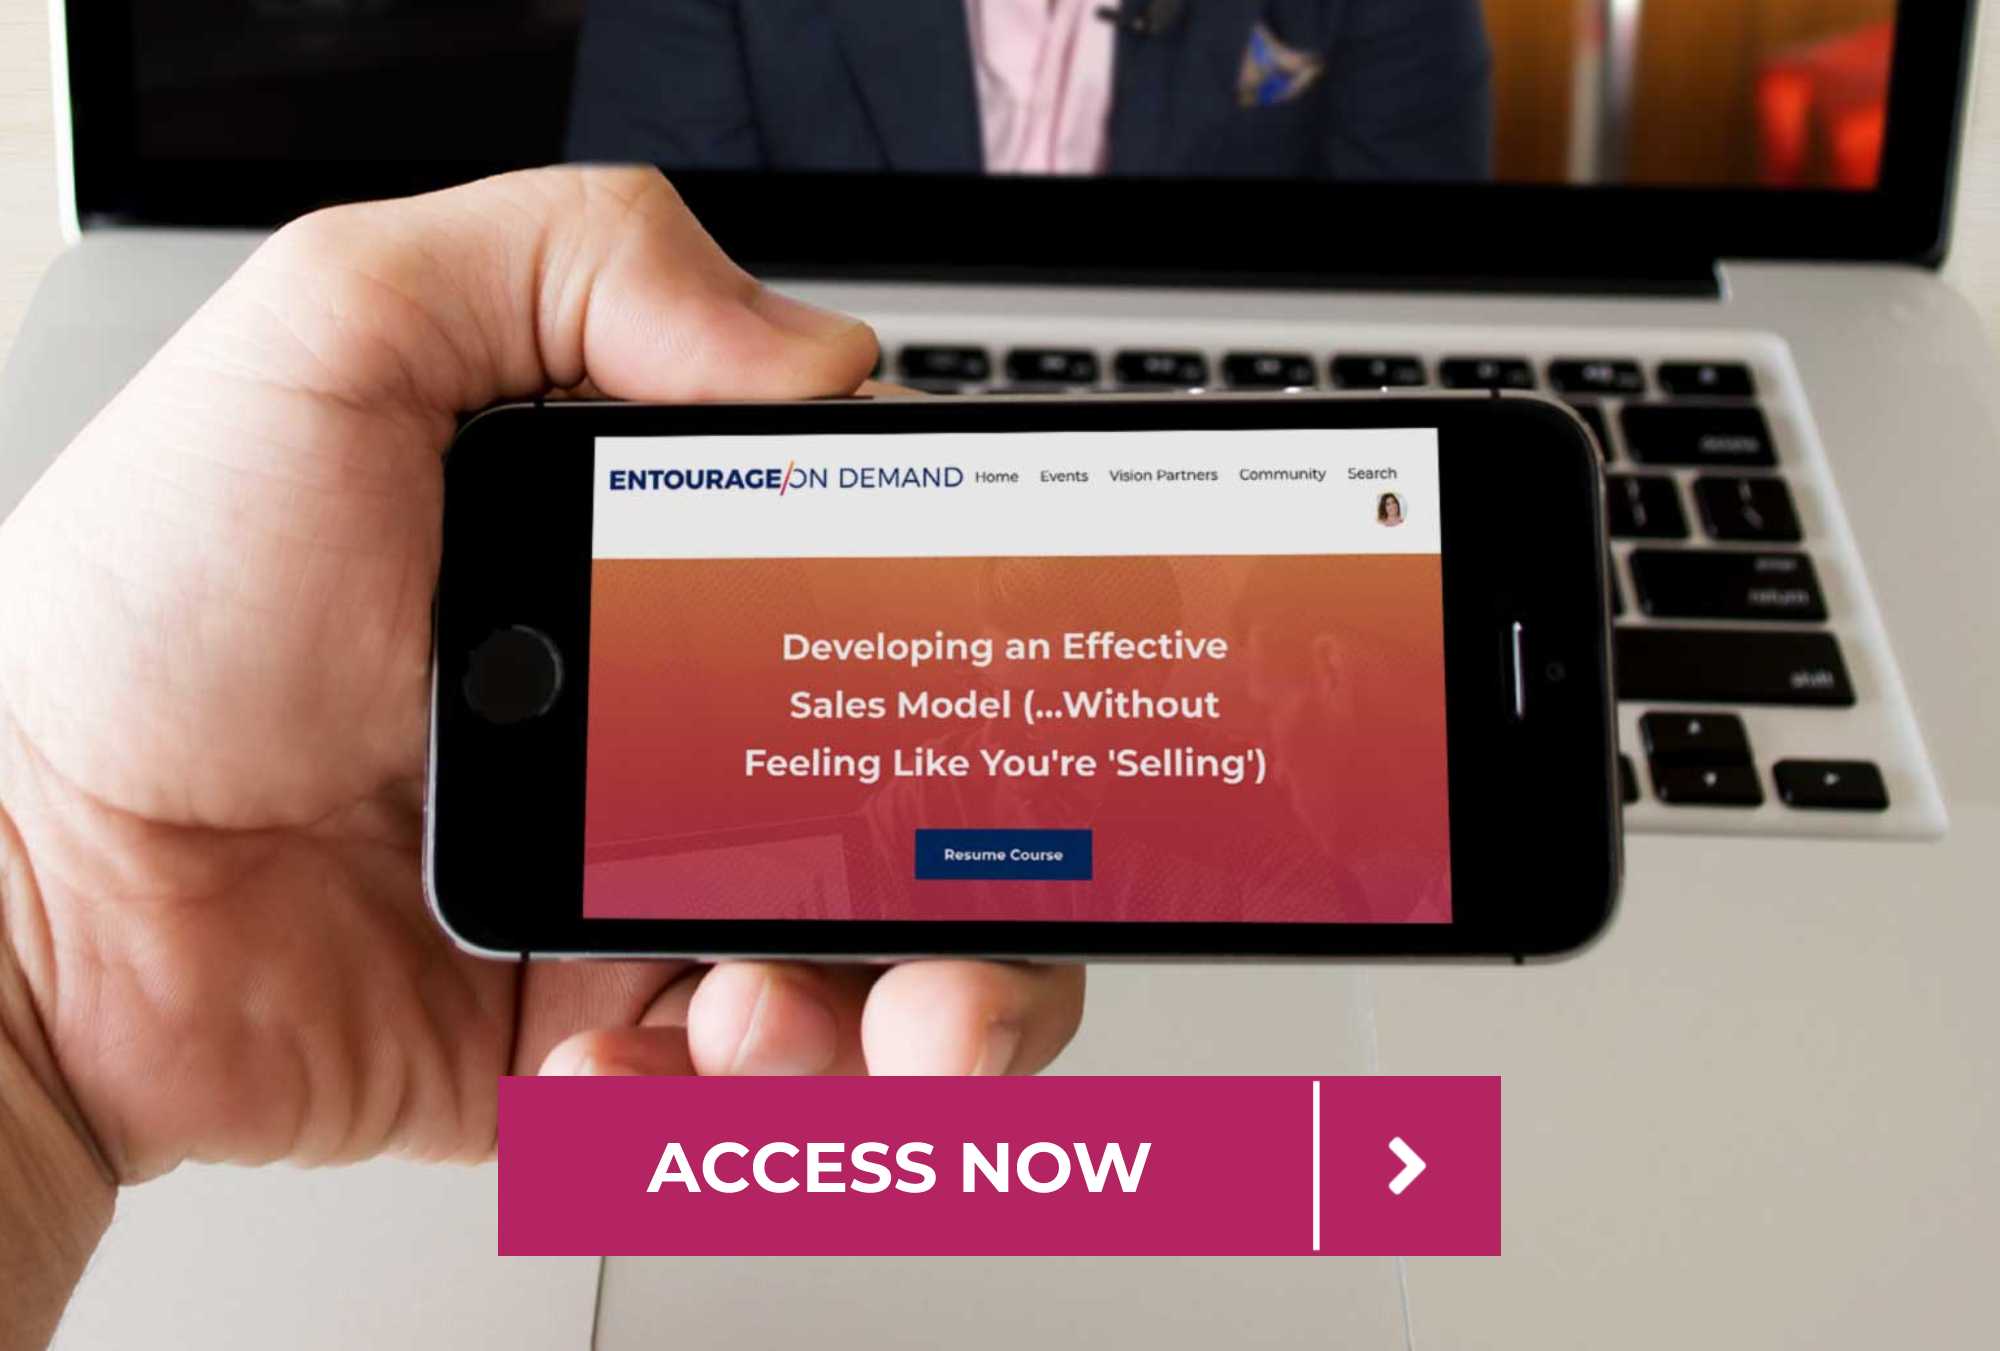 Phone and laptop showing a Developing An Effective Sales Model short course - button to access now